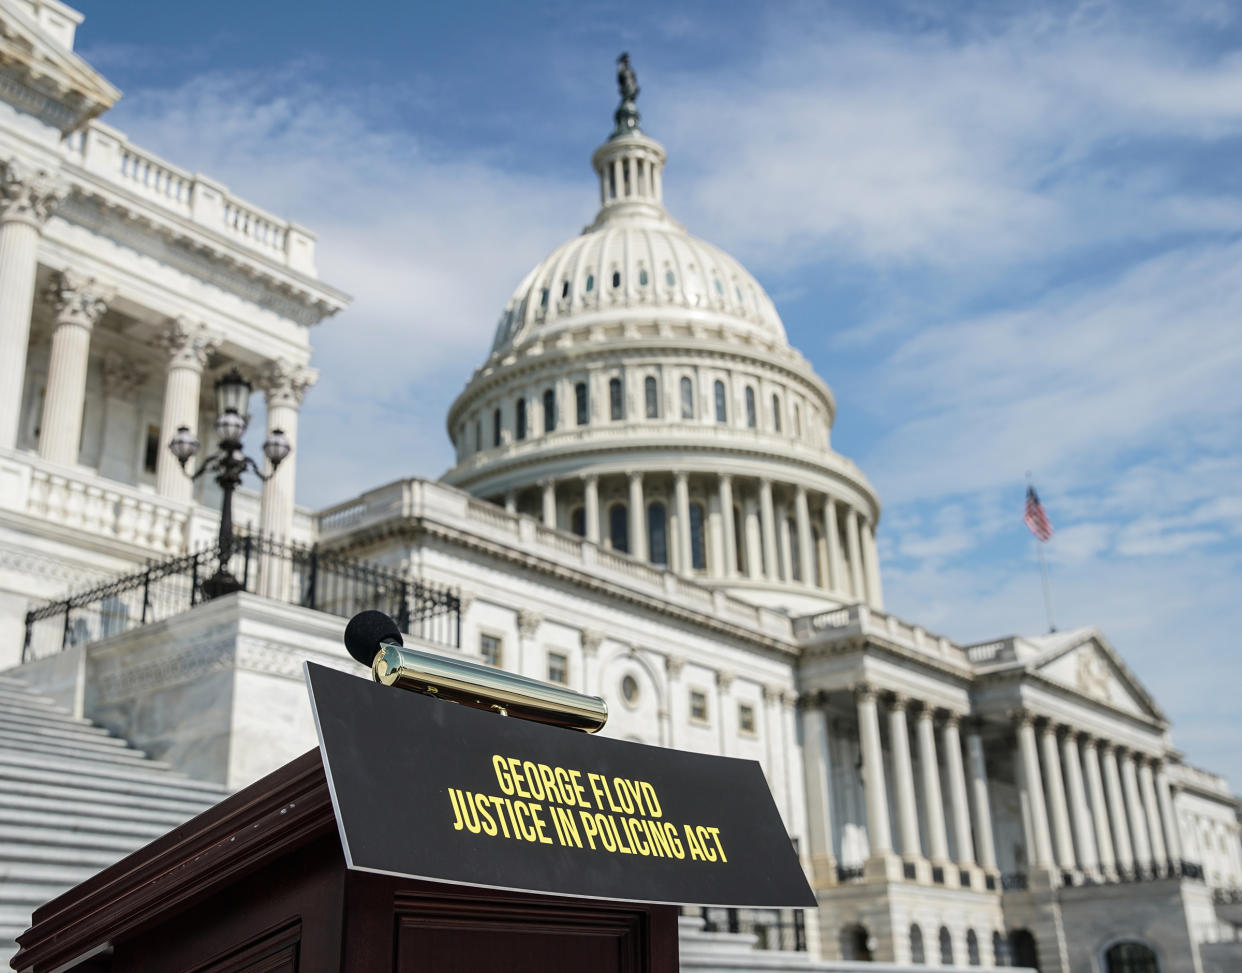 A press briefing is held prior to the House vote on the George Floyd Justice in Policing Act on Capitol Hill in Washington, D.C., on June 25, 2020.